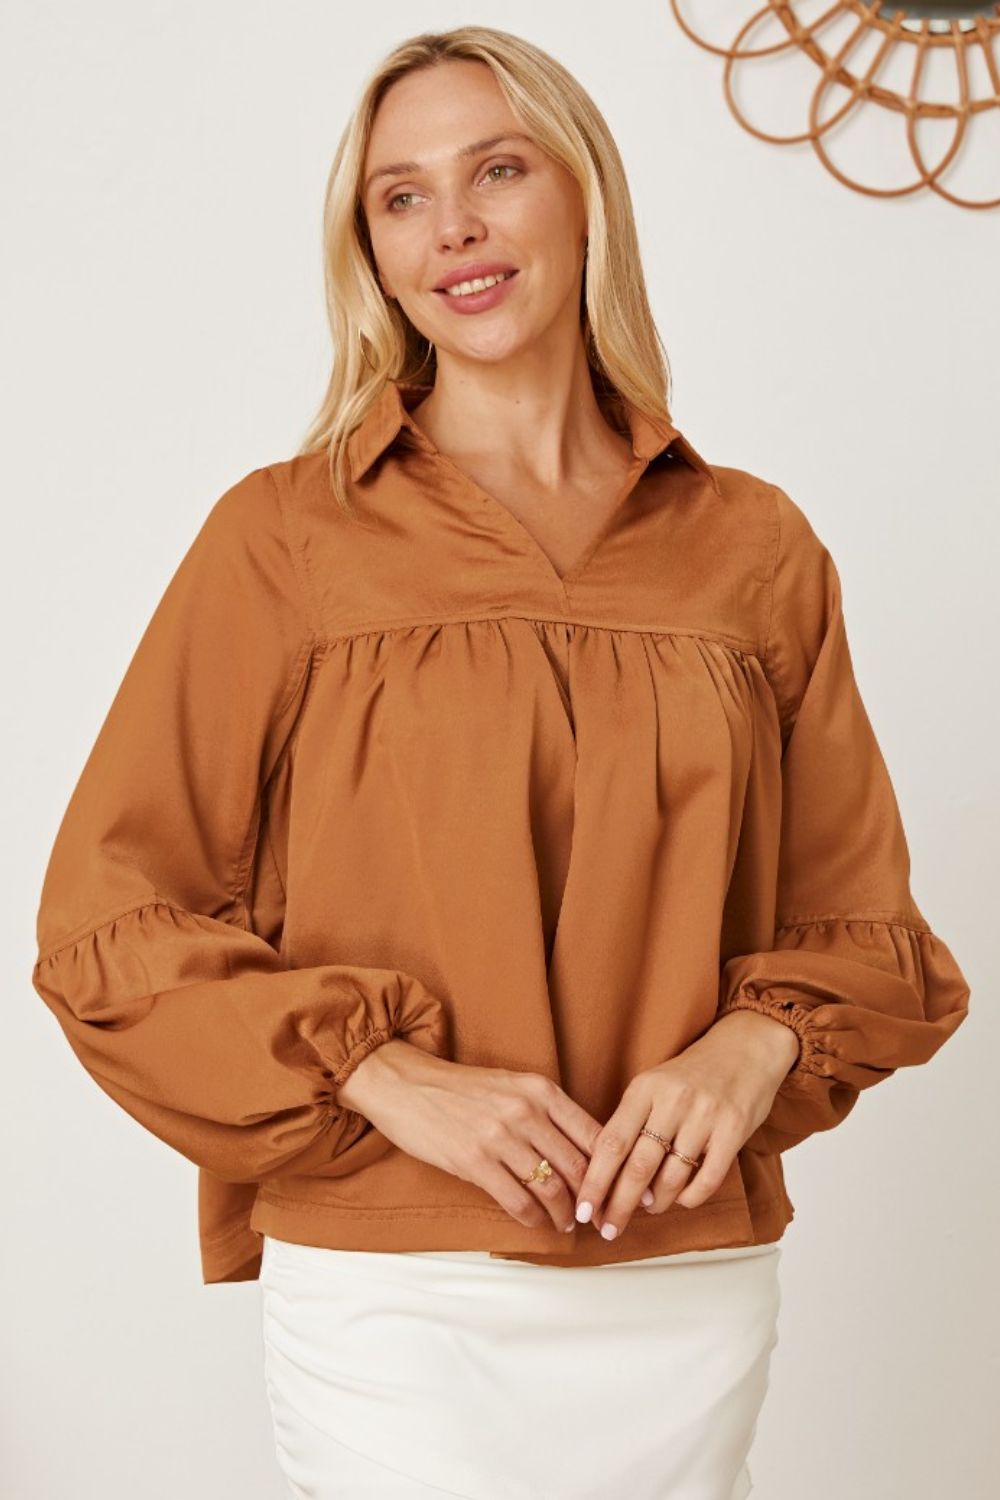 Balloon Sleeve Collared Neck Blouse - Women’s Clothing & Accessories - Shirts & Tops - 2 - 2024